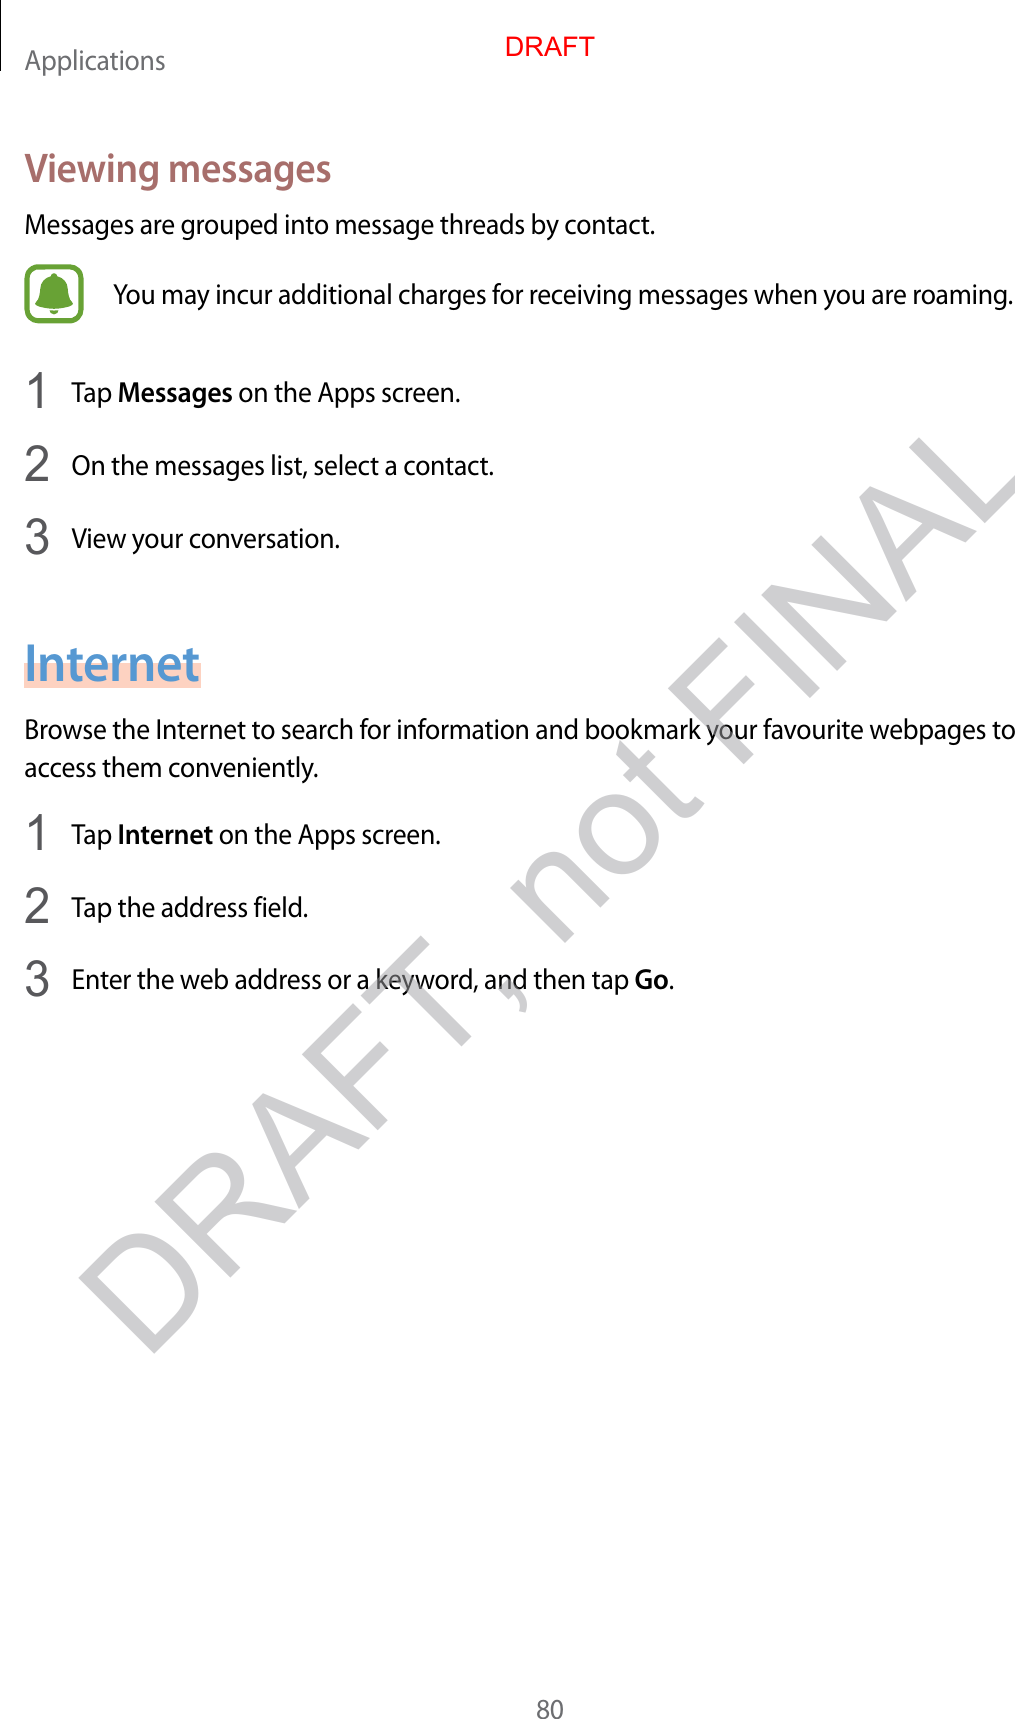 Applications80V ie wing messagesMessages are gr ouped int o message thr eads by c ontact.You may incur additional charges for r ec eiving messages when y ou ar e r oaming .1  Tap Messages on the Apps screen.2  On the messages list, select a contact.3  View y our c on v ersa tion.InternetBrow se the Internet to sear ch for information and bookmark your fa v ourite w ebpages t o access them c on v eniently.1  Tap Internet on the Apps screen.2  Tap the address field.3  Enter the w eb addr ess or a keywor d , and then tap Go.DRAFTDRAFT, not FINAL